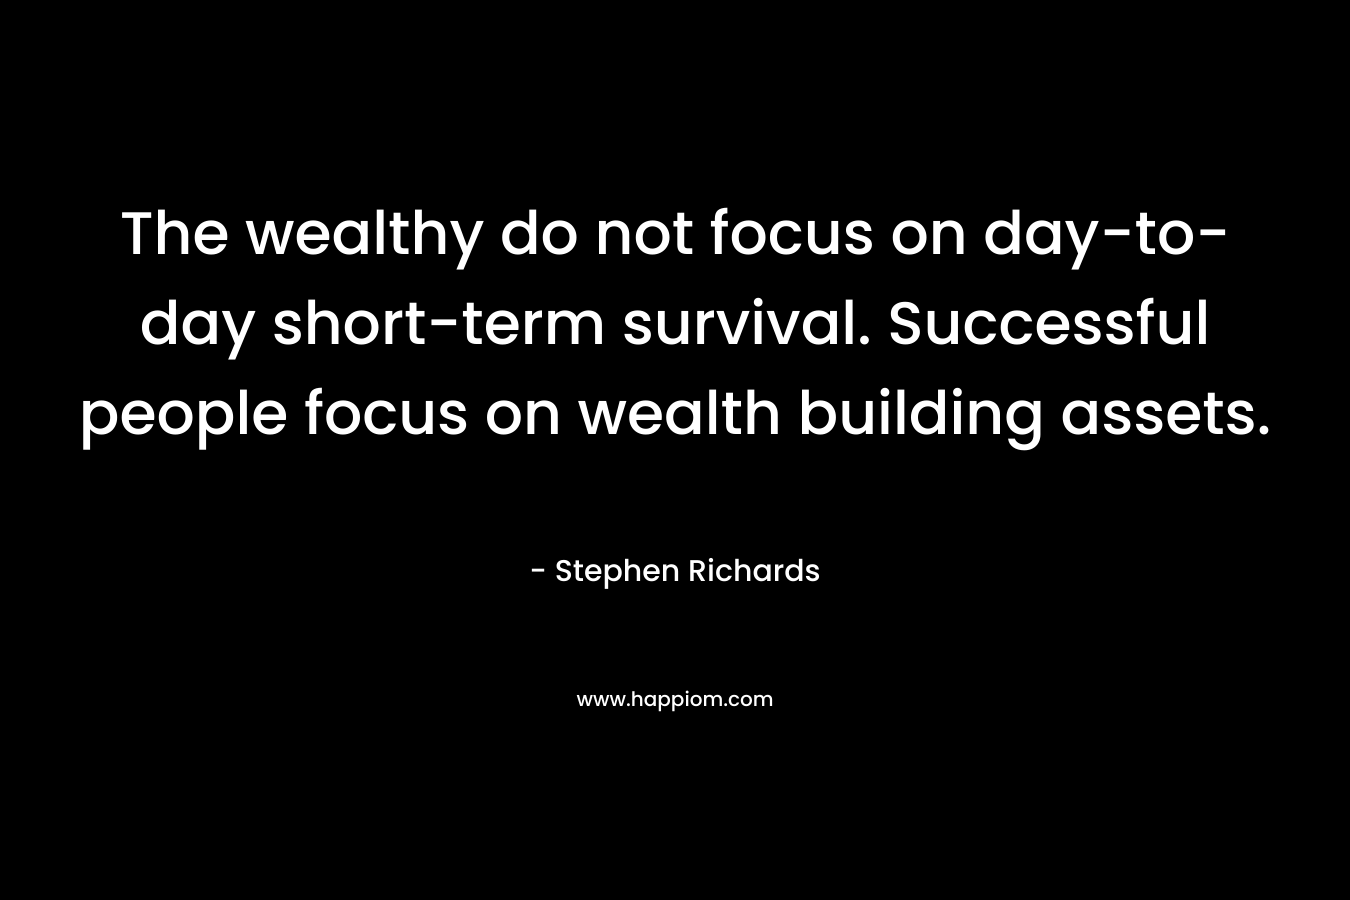 The wealthy do not focus on day-to-day short-term survival. Successful people focus on wealth building assets.